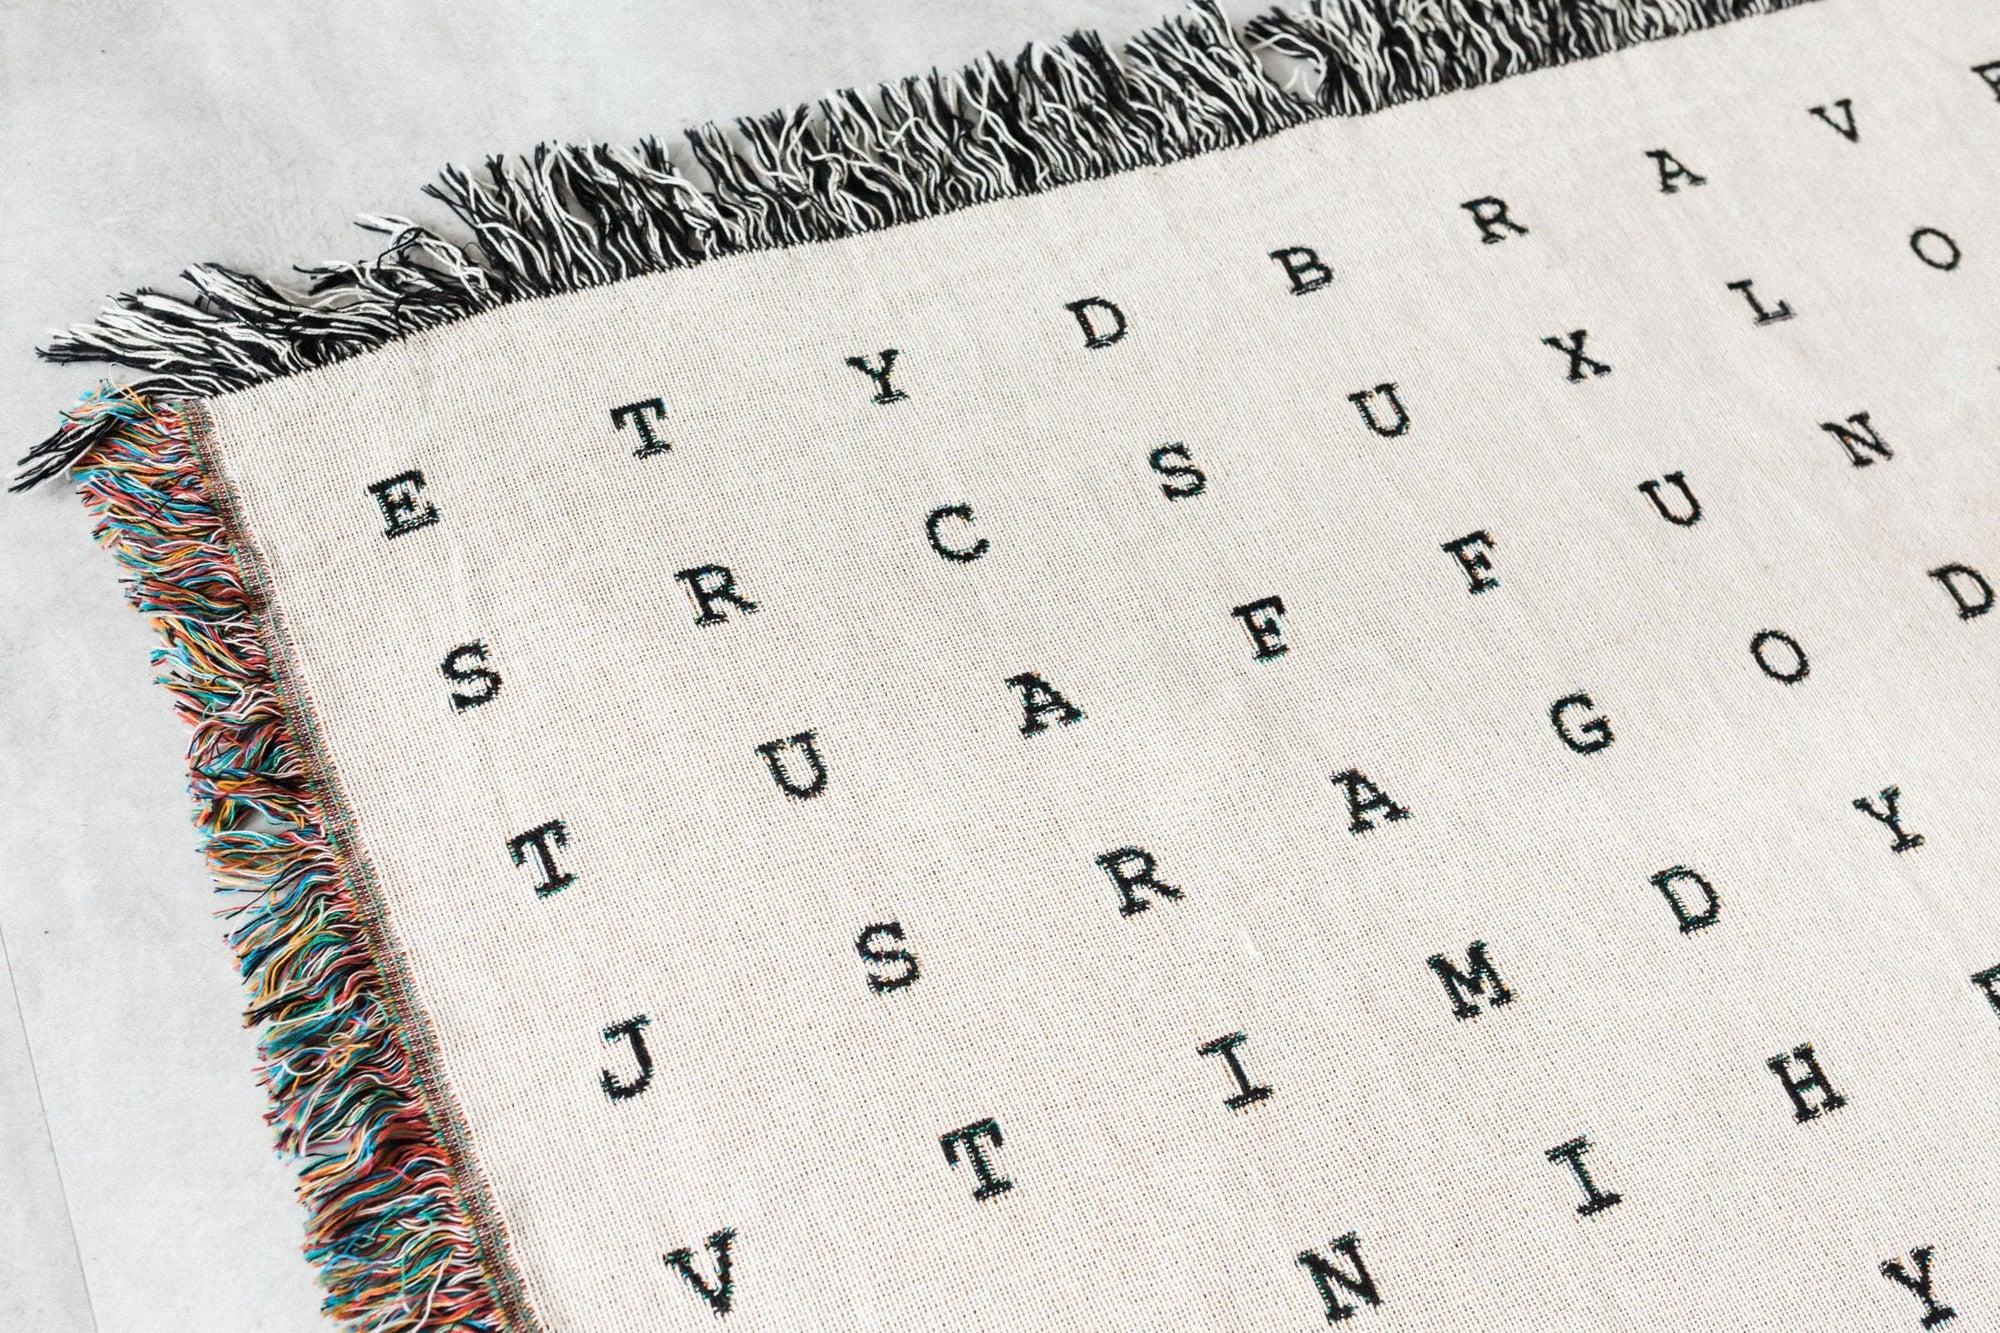 Word Search Throw Blanket